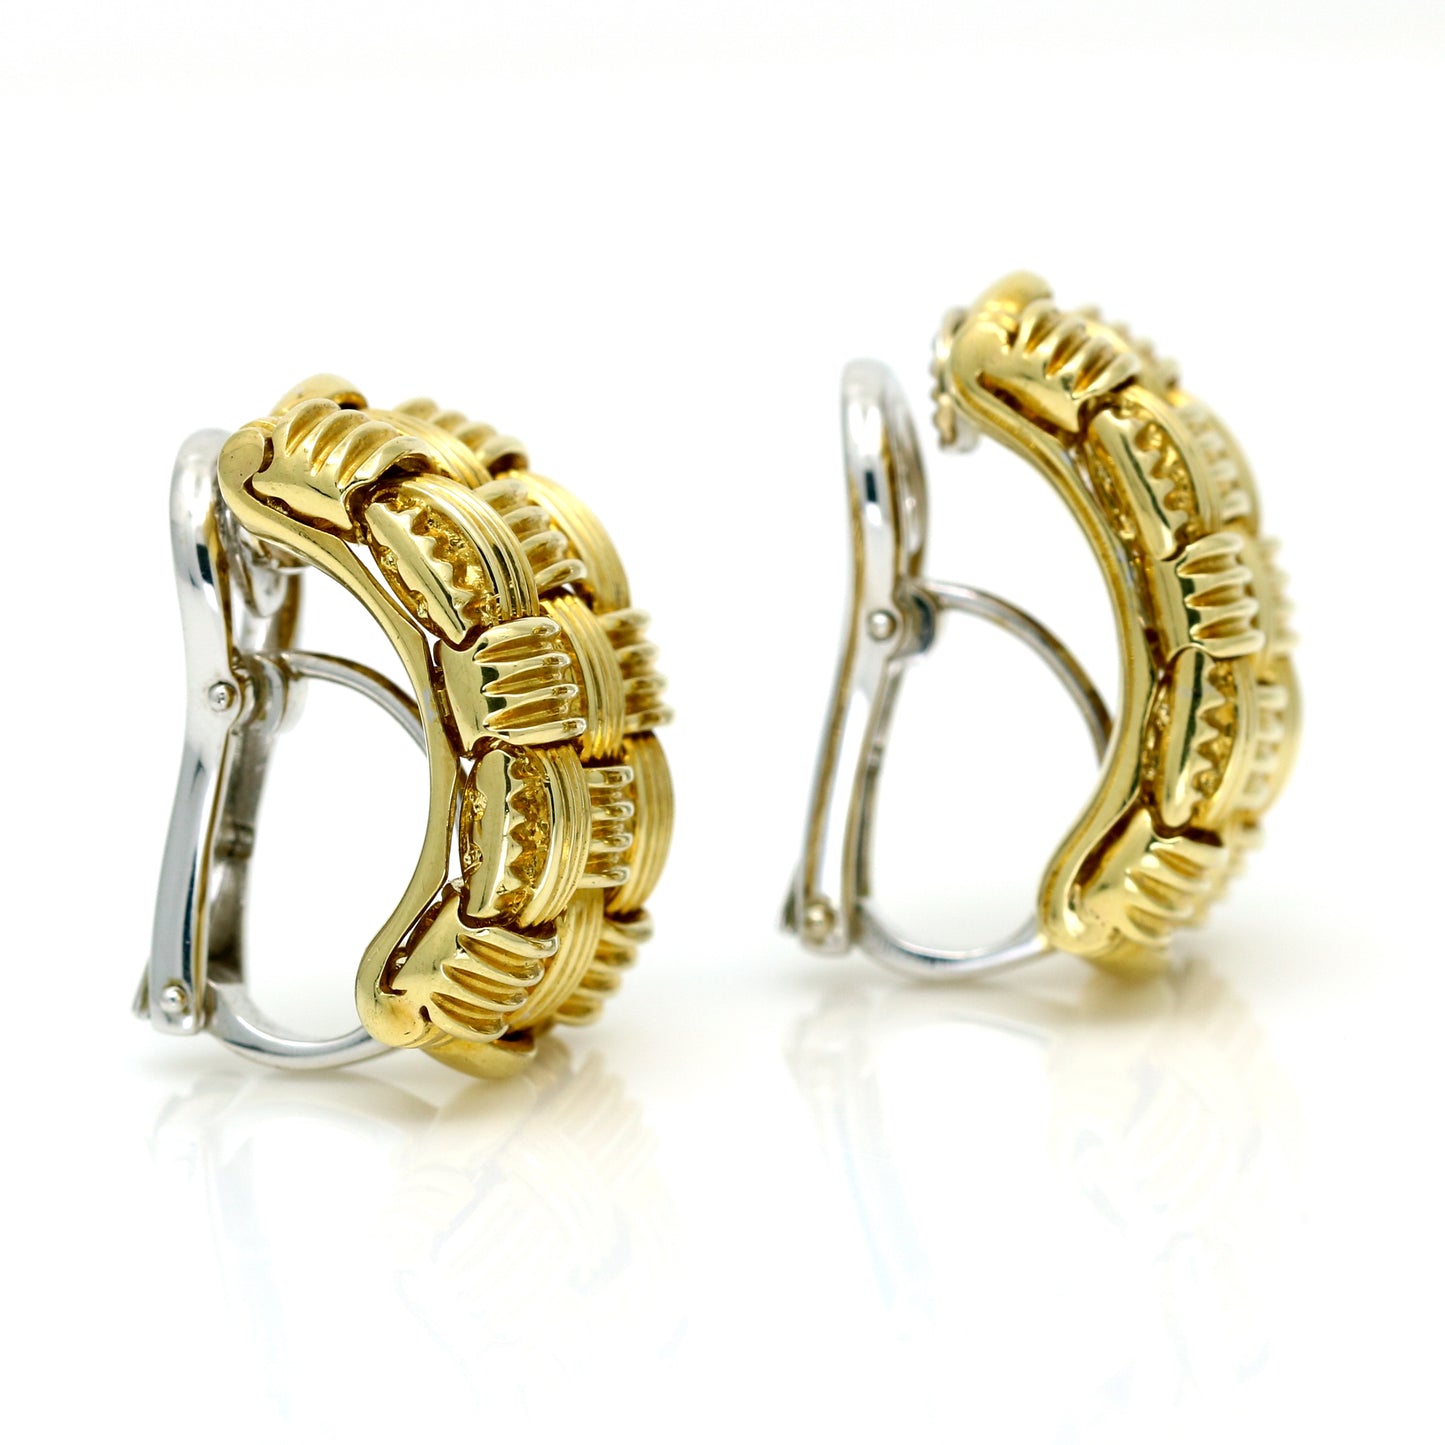 Roberto Coin Appassionata C-Hoop Statement Earrings in 18k Yellow Gold